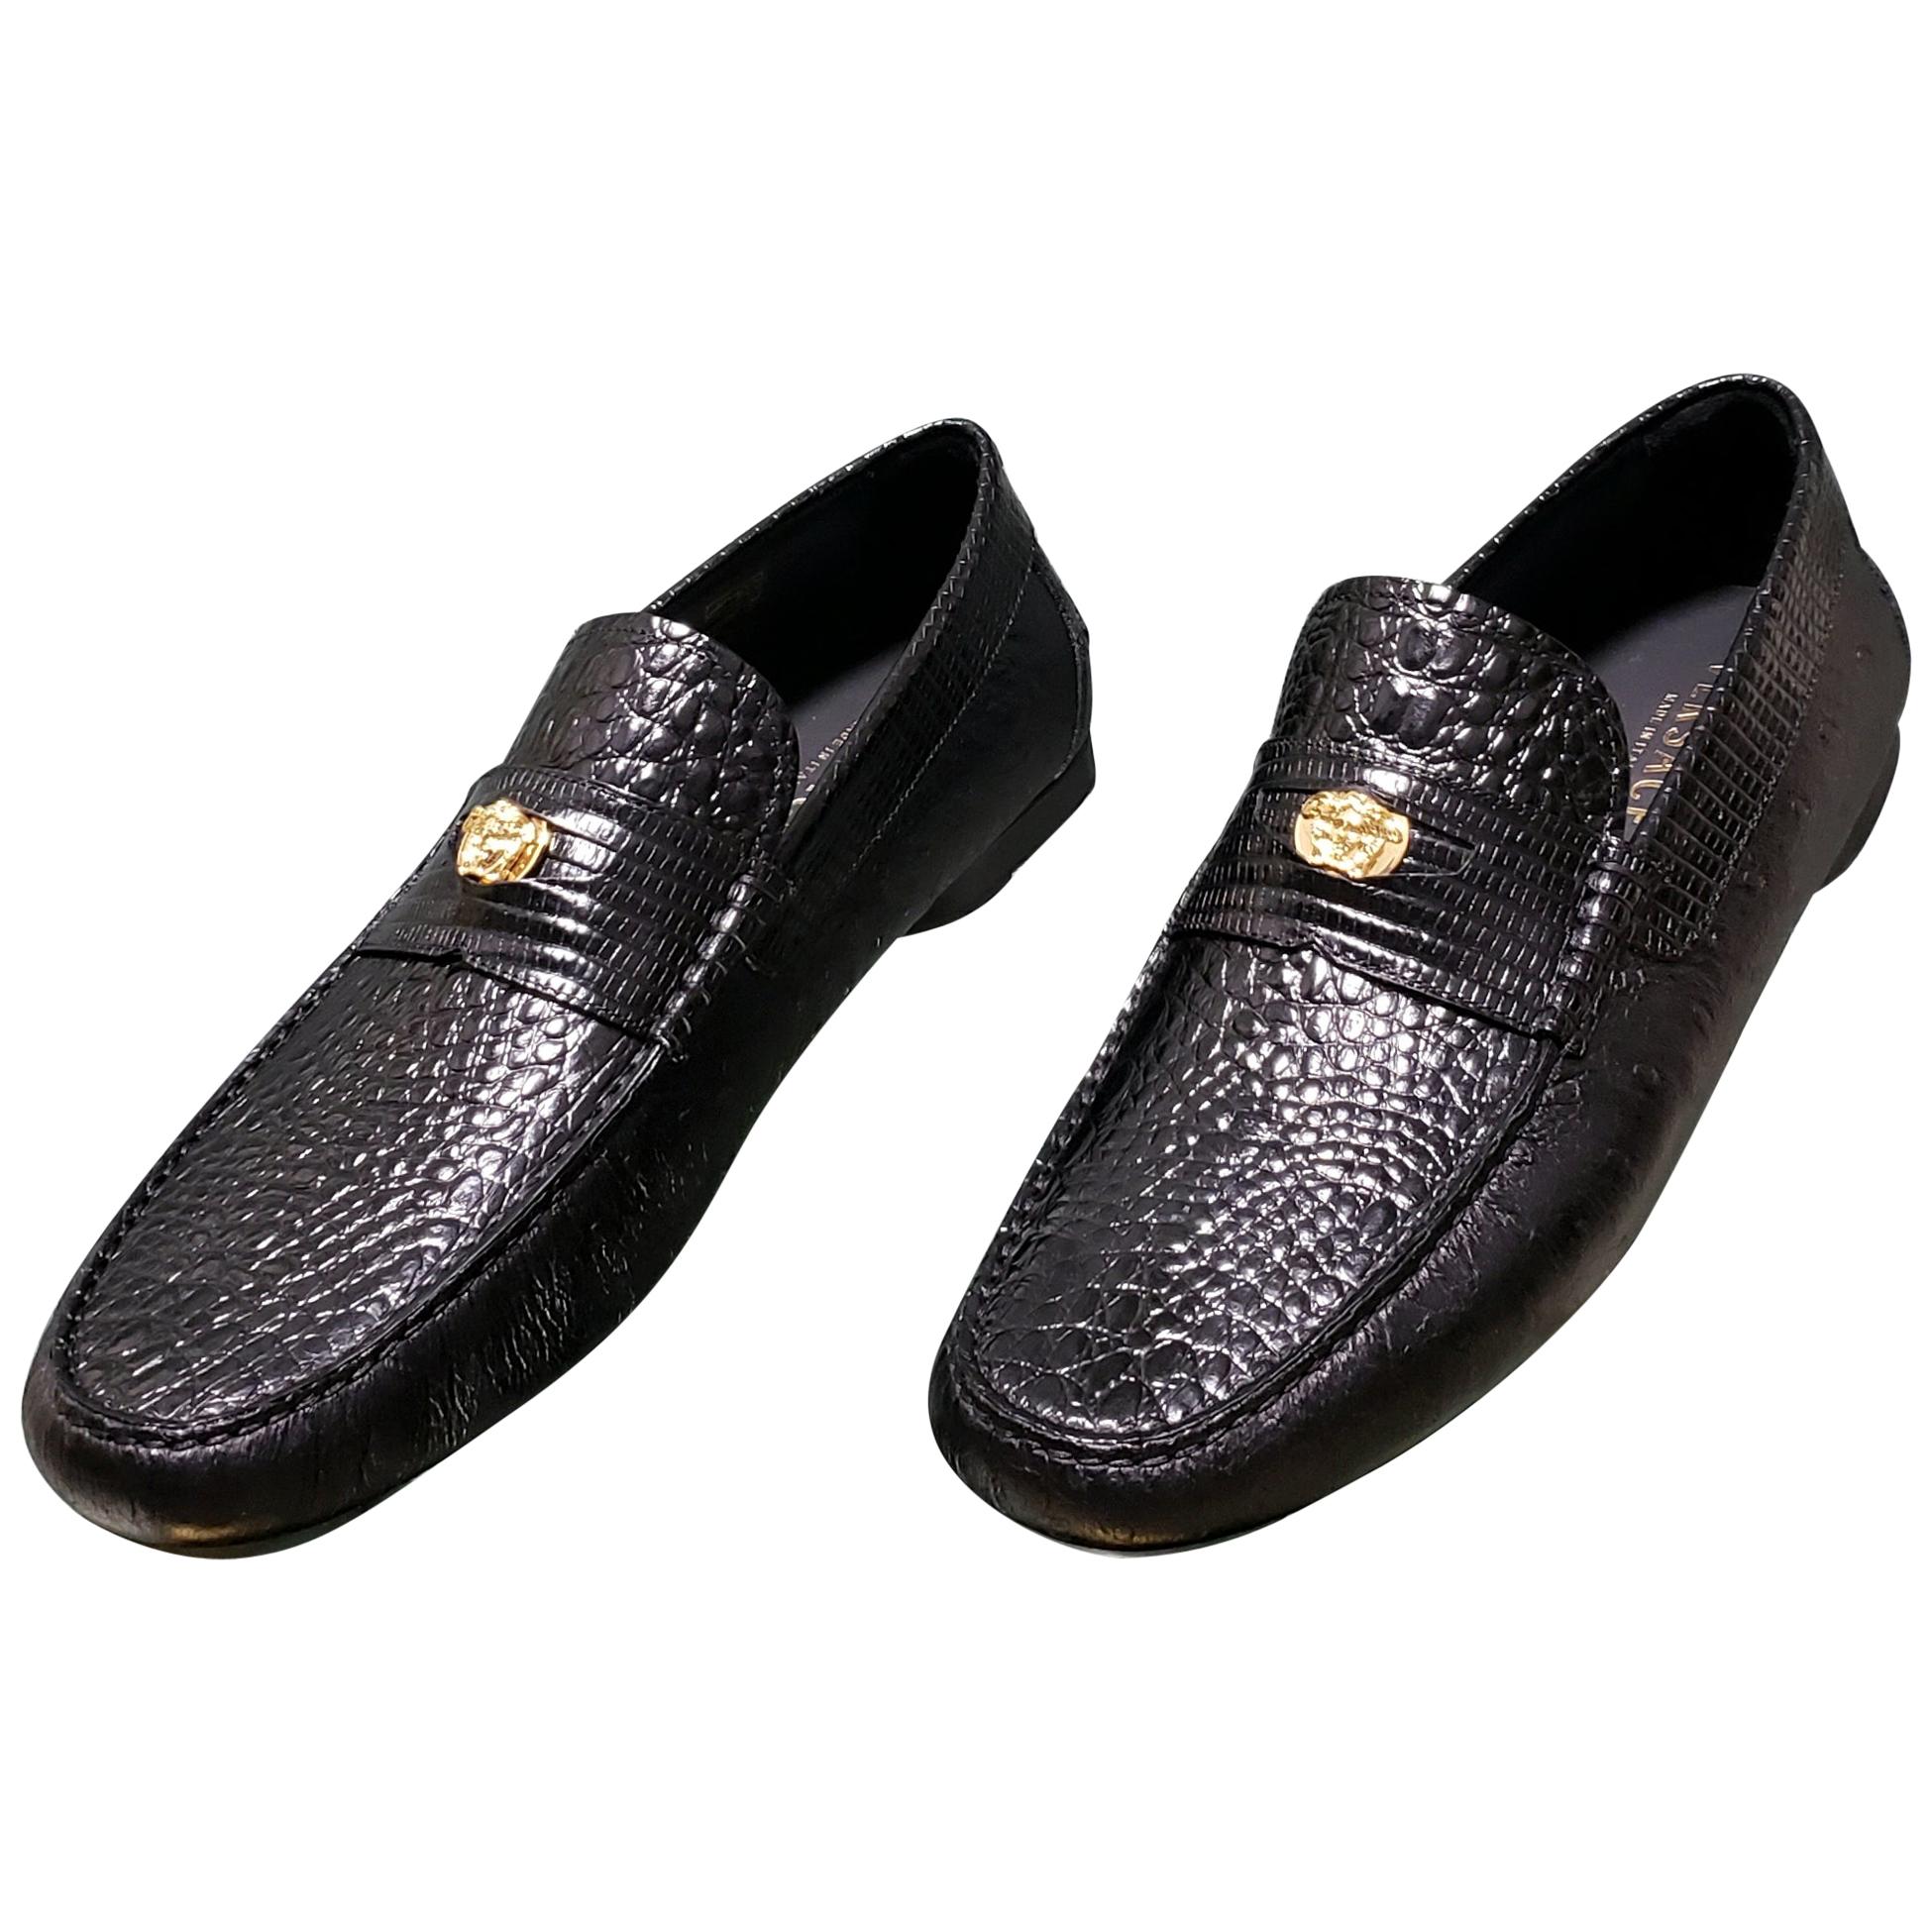 NEW VERSACE BLACK OSTRICH and CROCODILE PRINT LEATHER CITY LOAFER SHOES 46 - 13